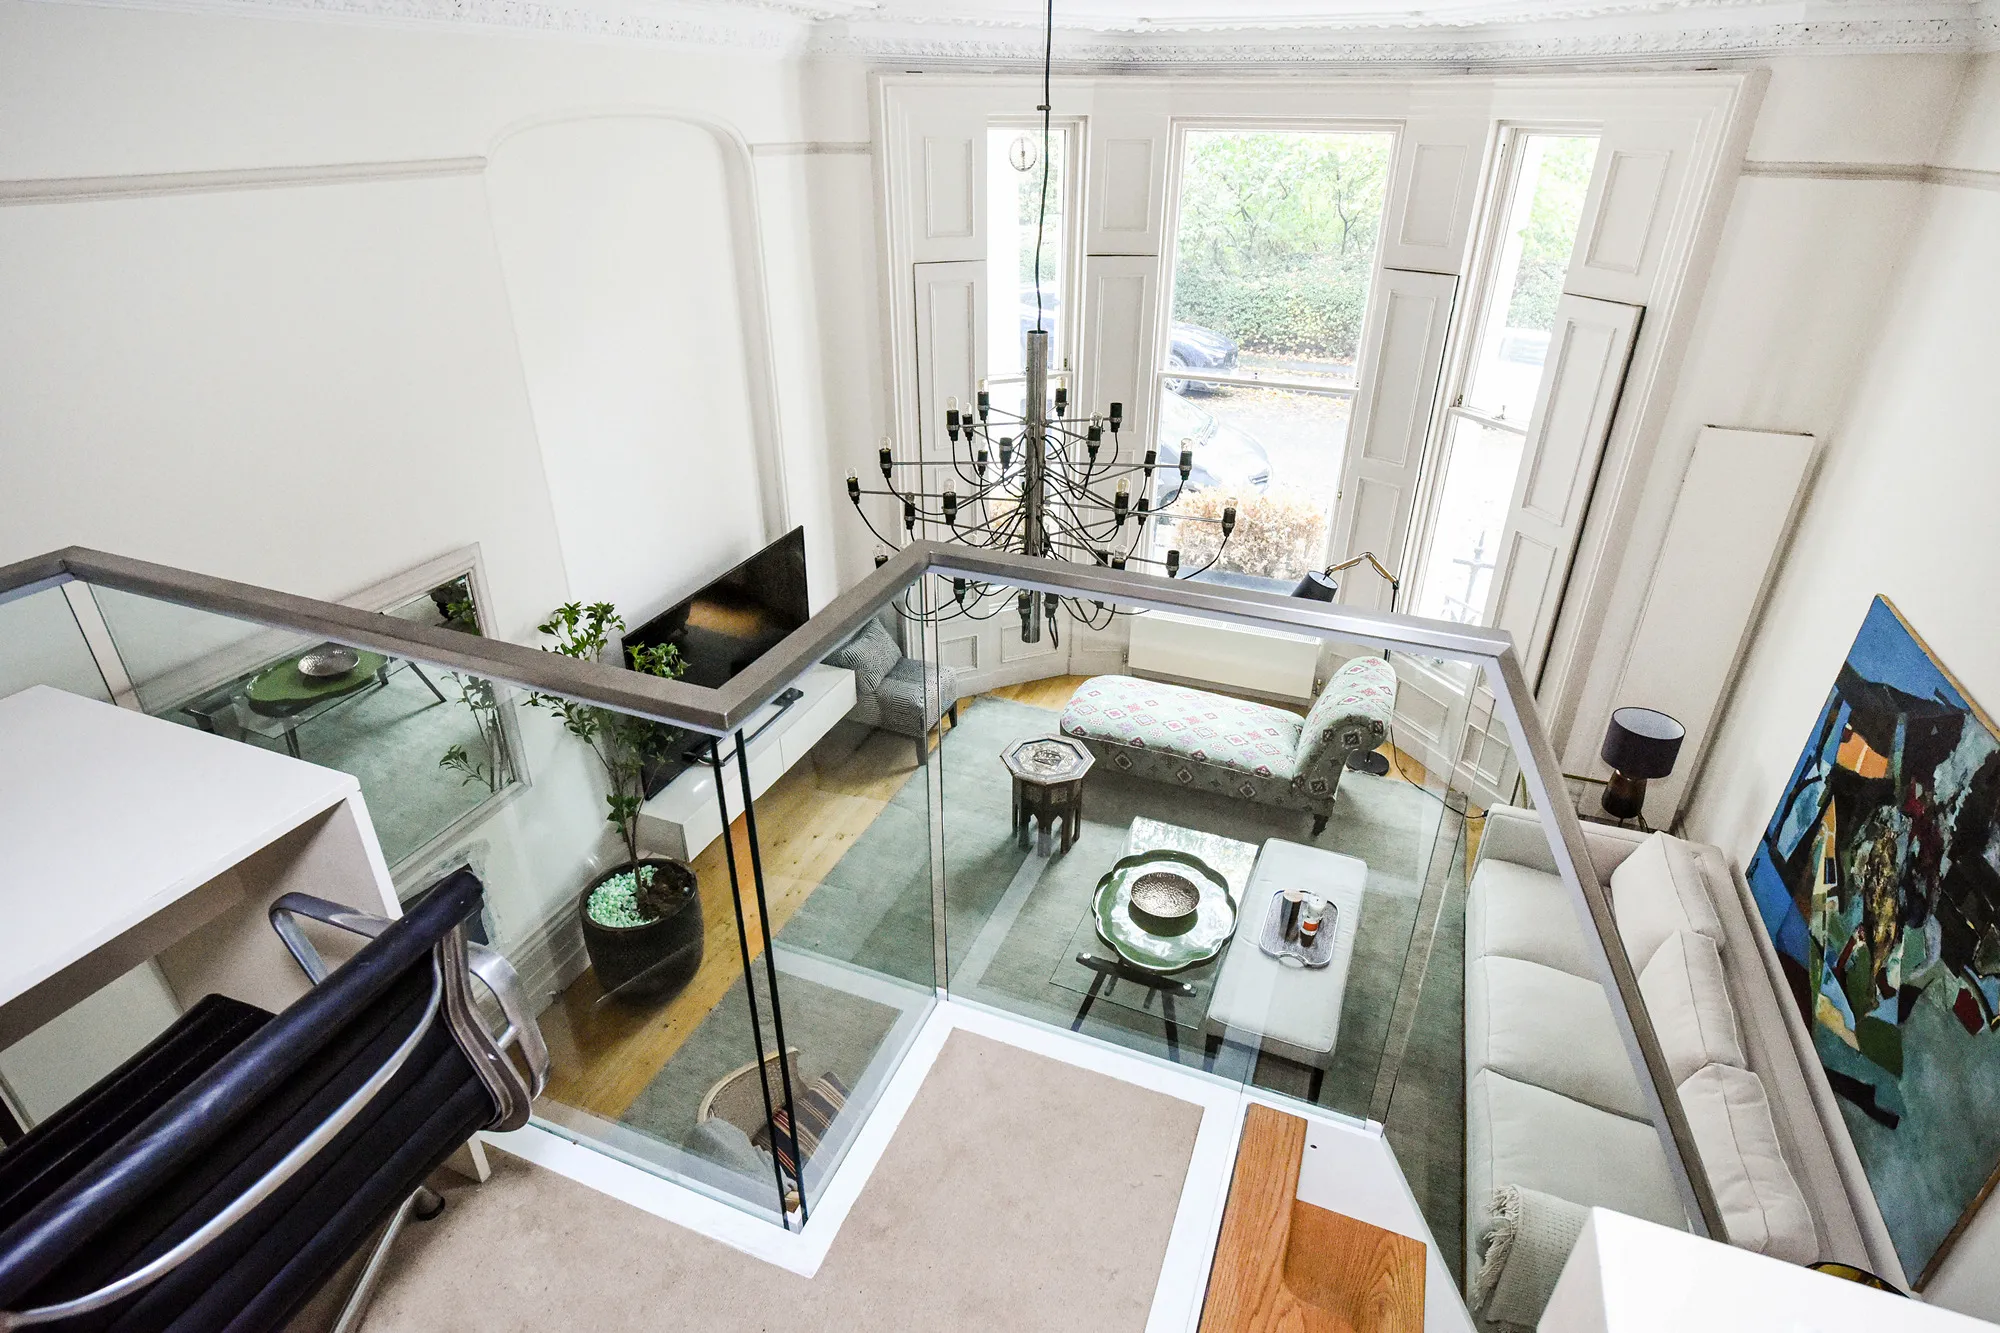 Courtfield Gardens, holiday apartment in South Kensington, London